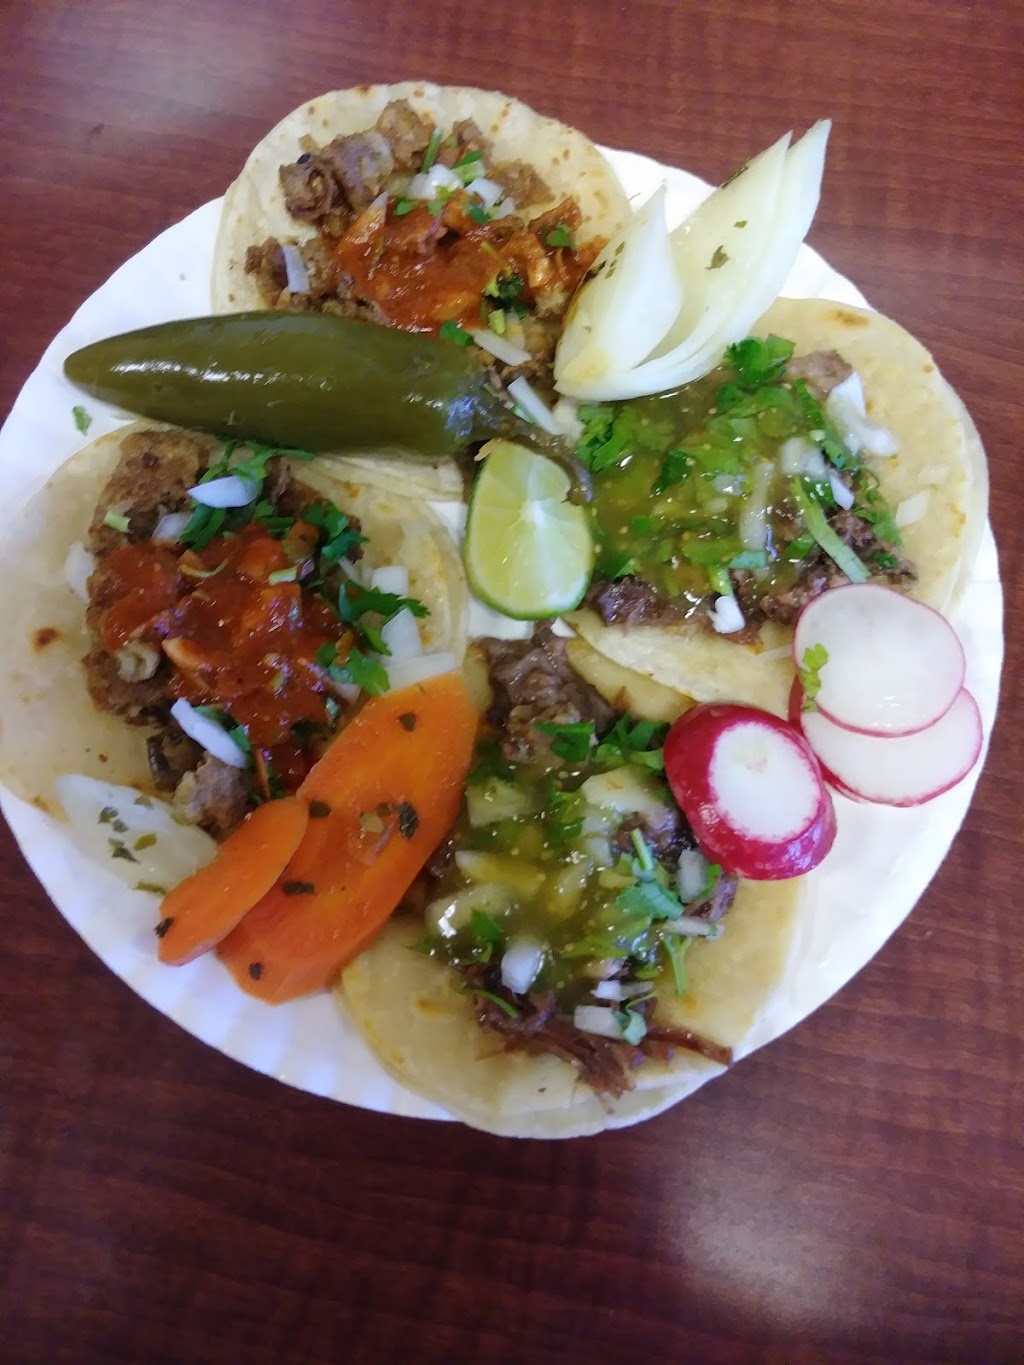 Taqueria El Grullense | 2135 Willow Pass Rd, Bay Point, CA 94565 | Phone: (925) 458-7603